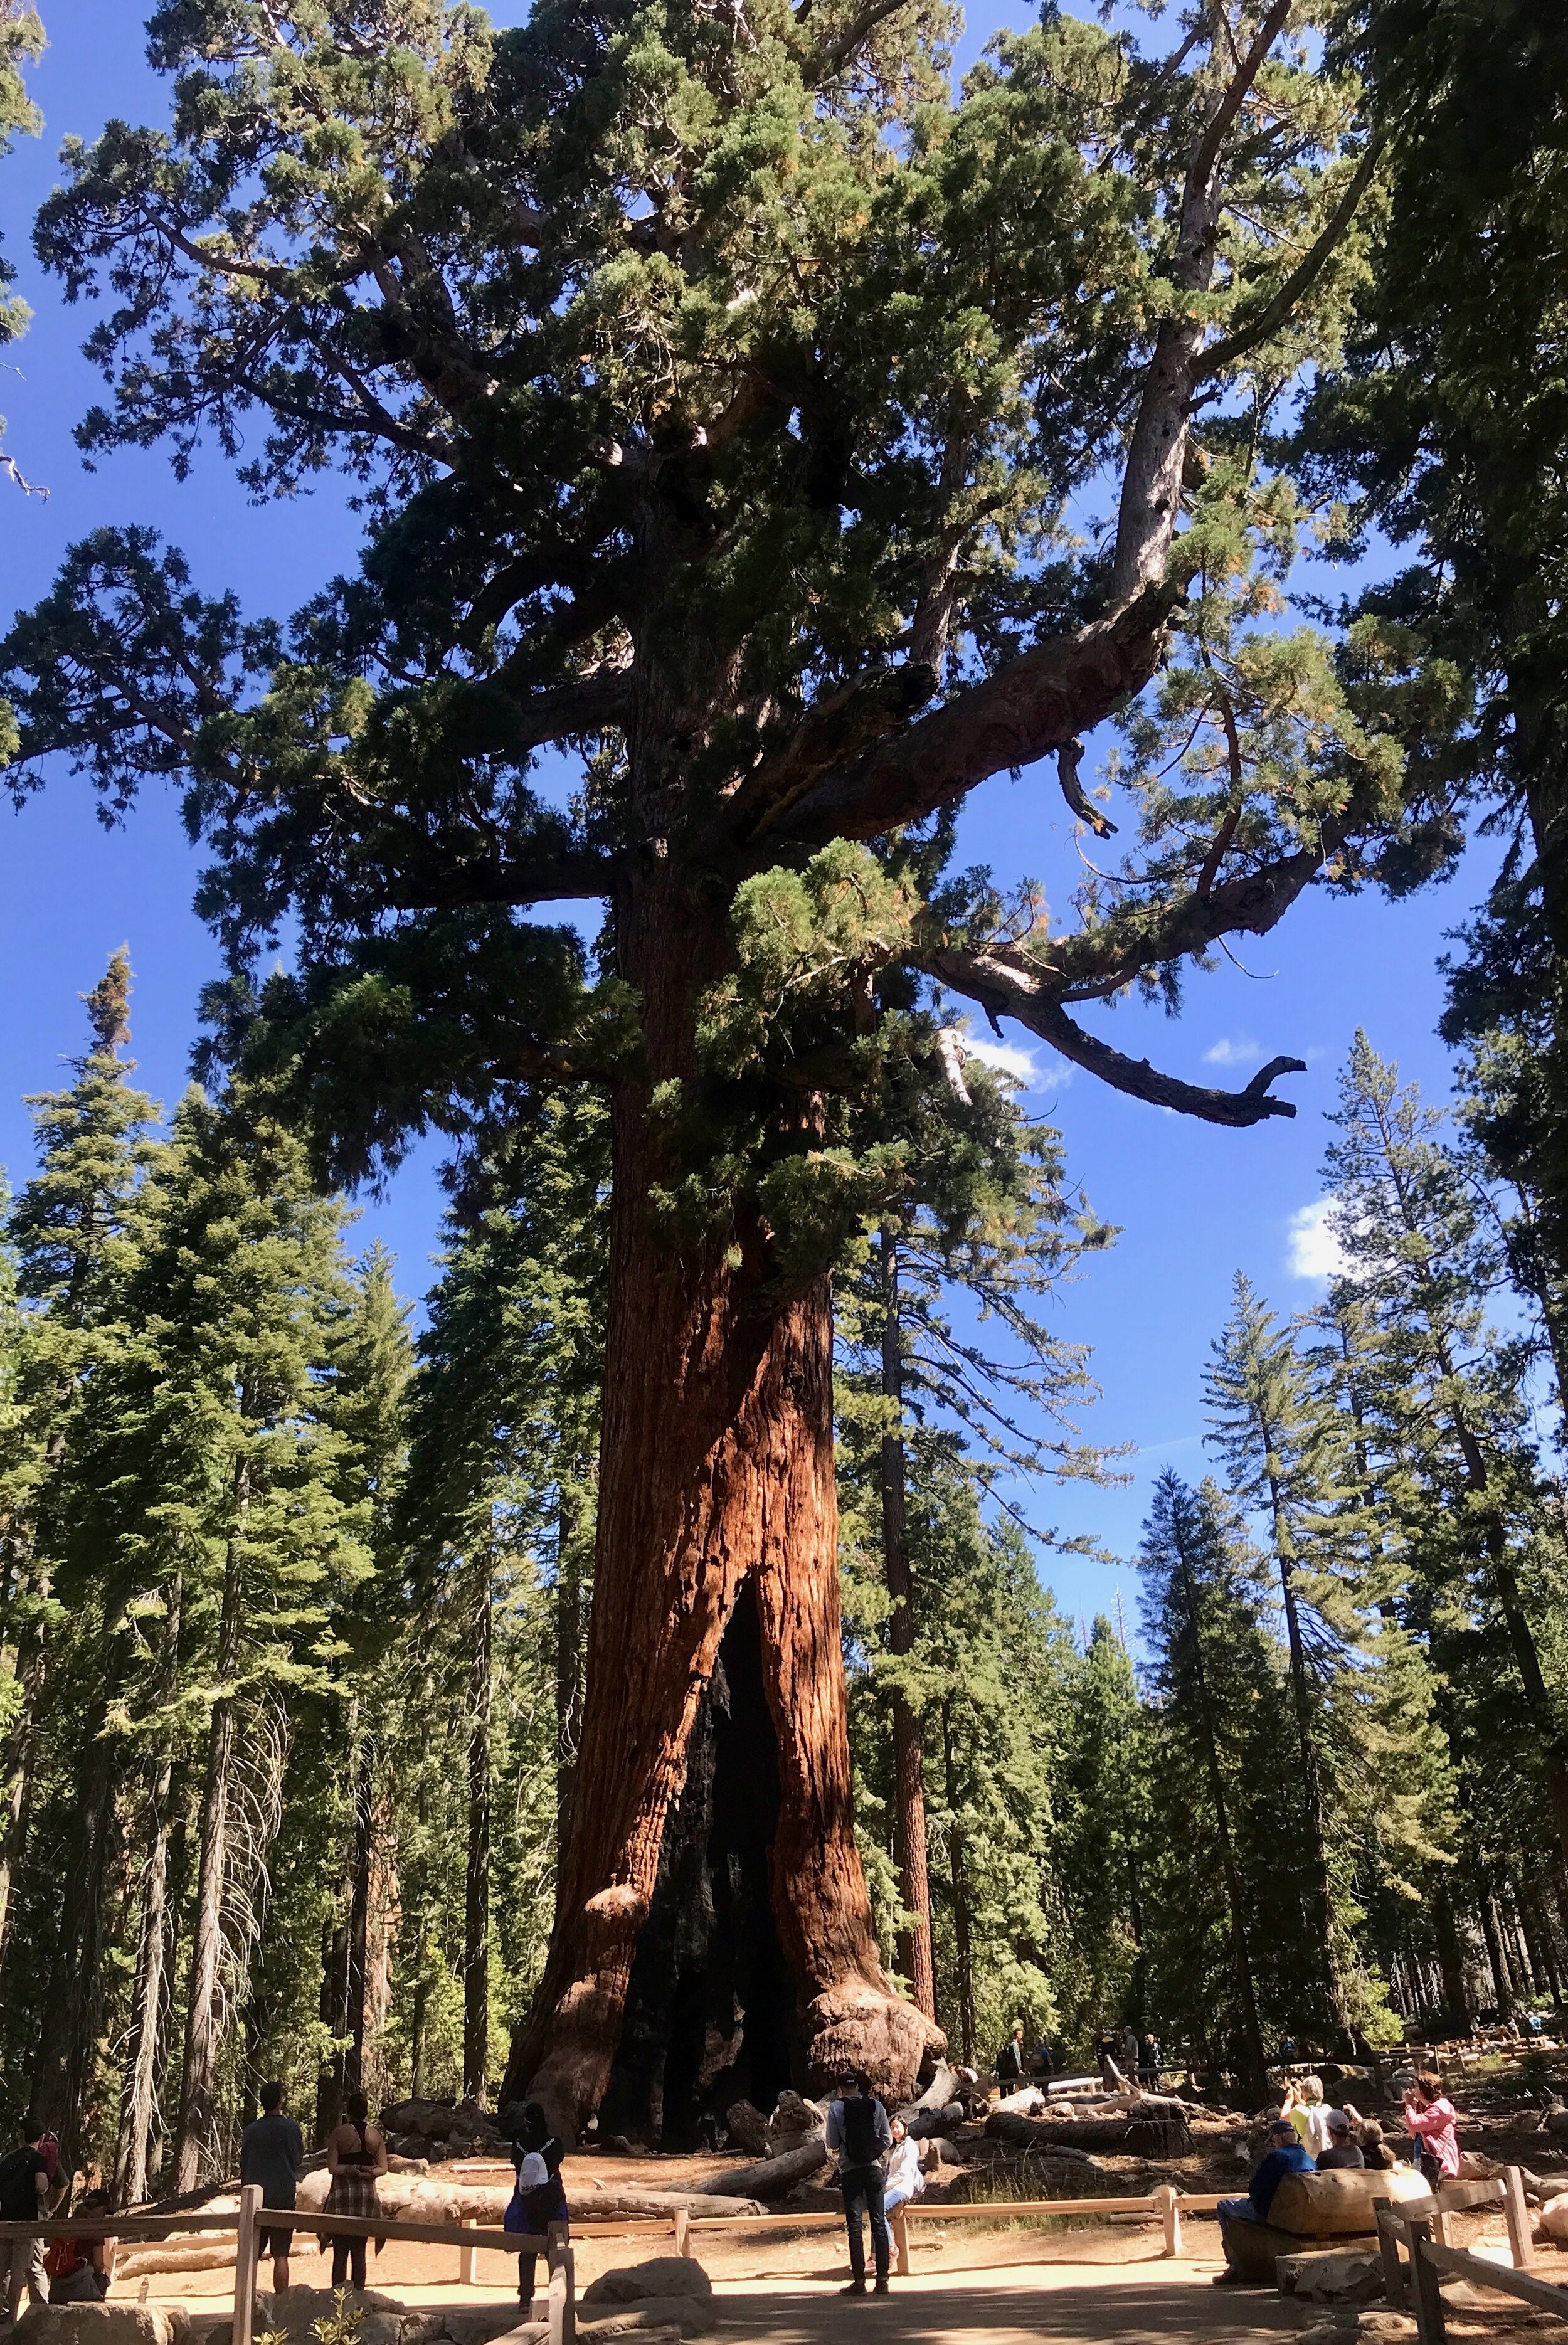  Tourists visit Grizzy Giant, one of the largest giant sequoias in the Mariposa Grove, part of Yosemite National Park. 